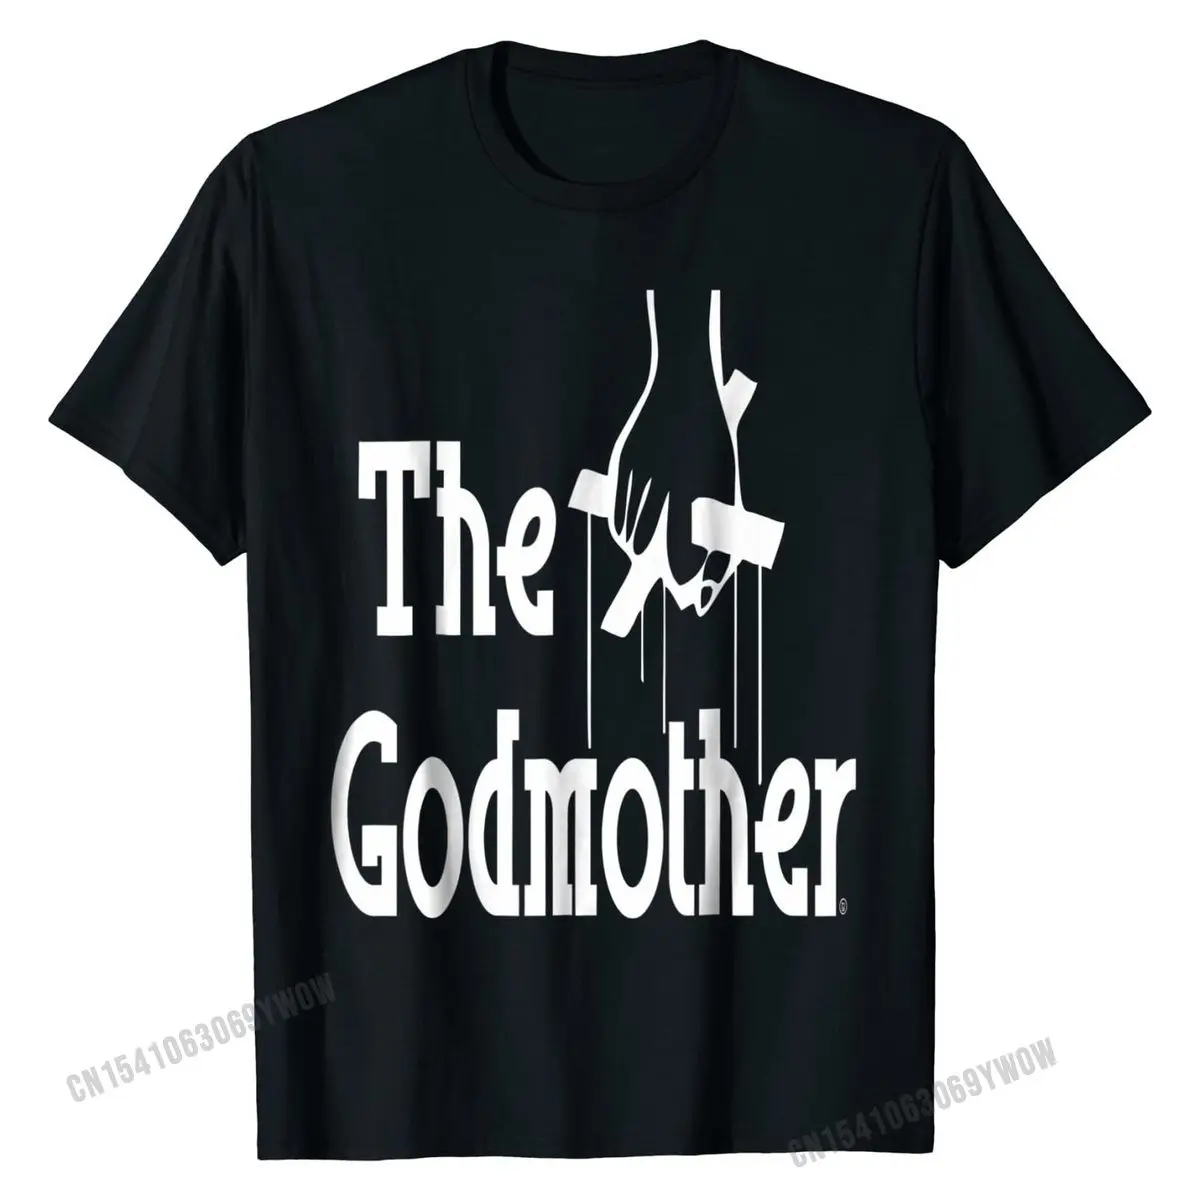 The Godmother Funny Birthday Gifts Baptism Parody T-Shirt Cotton Design T Shirt New Coming Men's Top T-shirts Printed